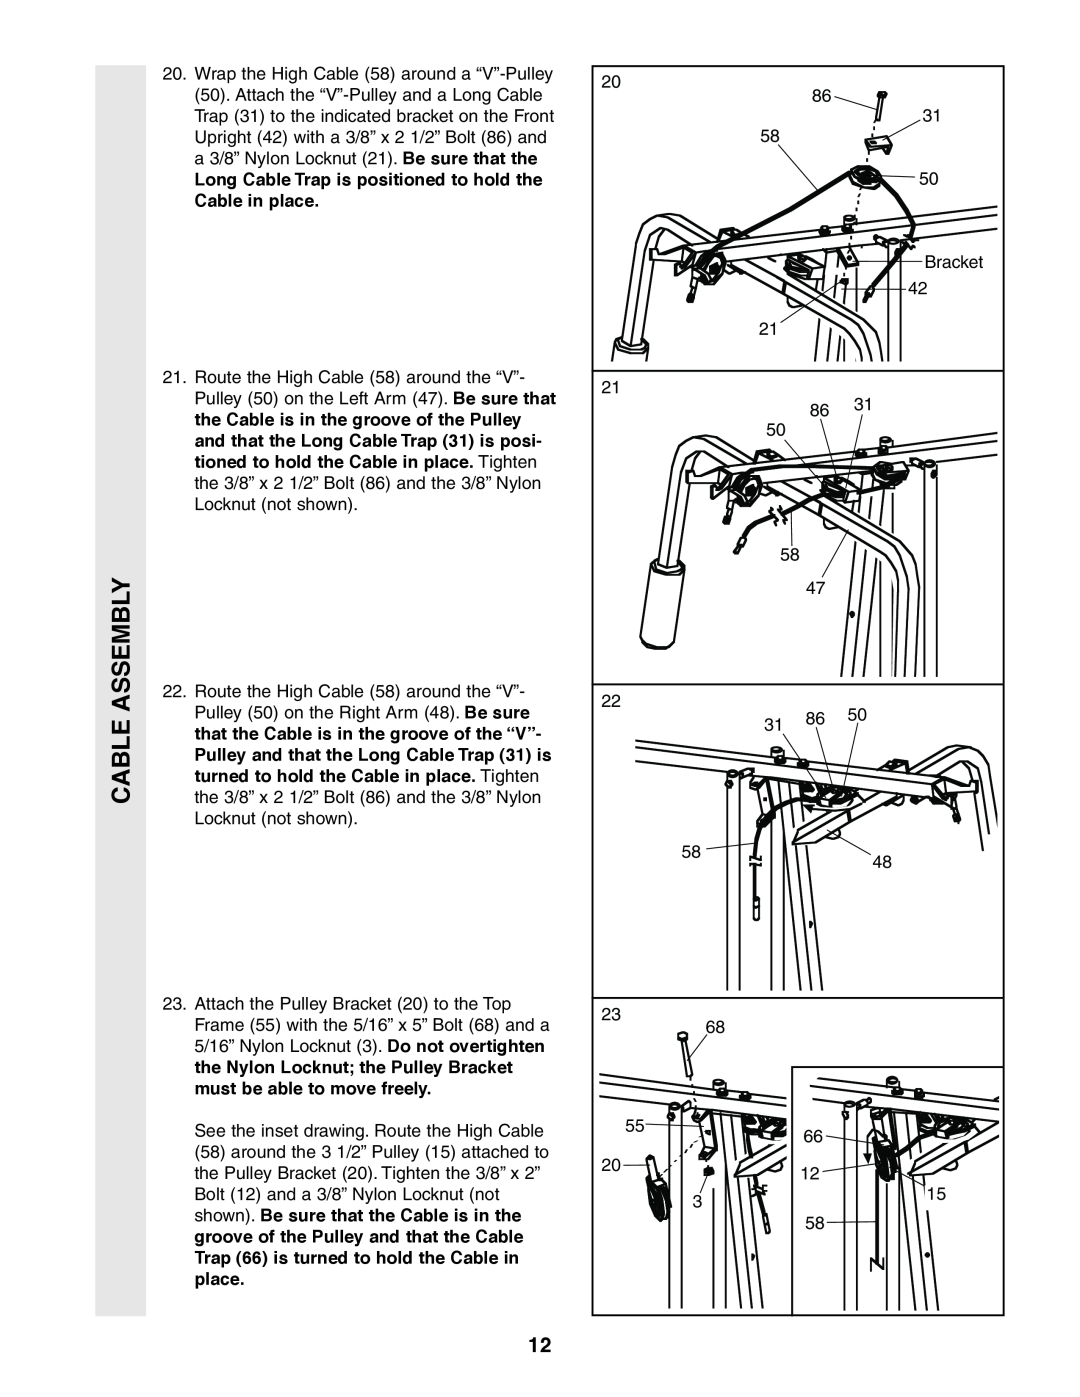 Weider 831.159380 user manual Cable Assembly, Long Cable Trap is positioned to hold the Cable in place 